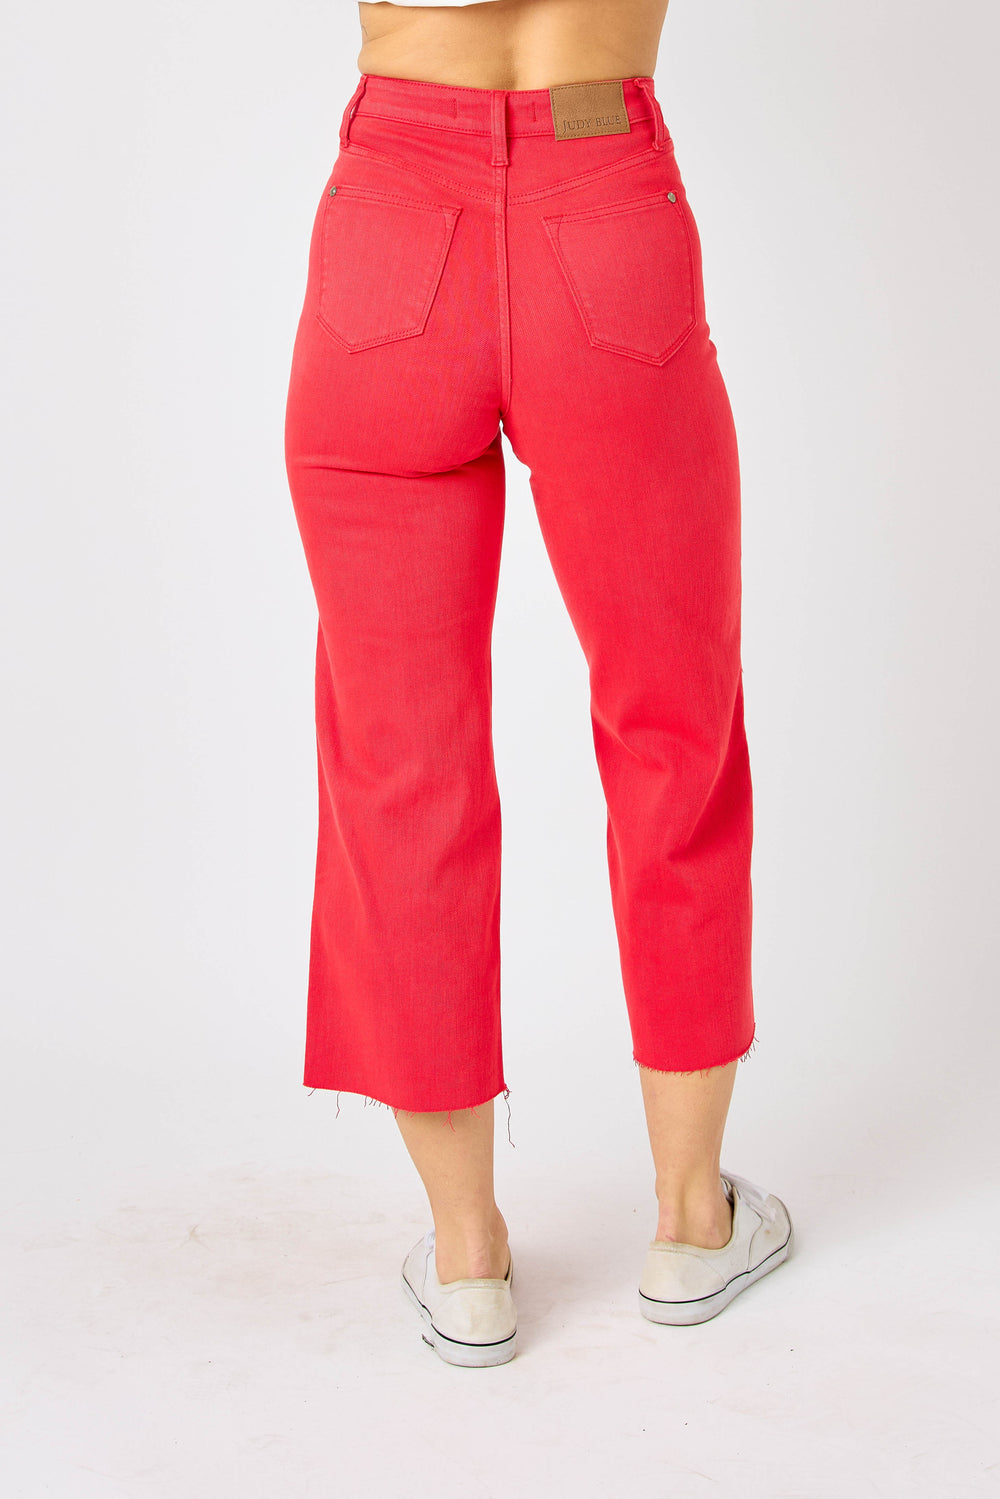 Judy Blue Red Jeans - Wide Leg - Cropped - Inspired Eye Boutique